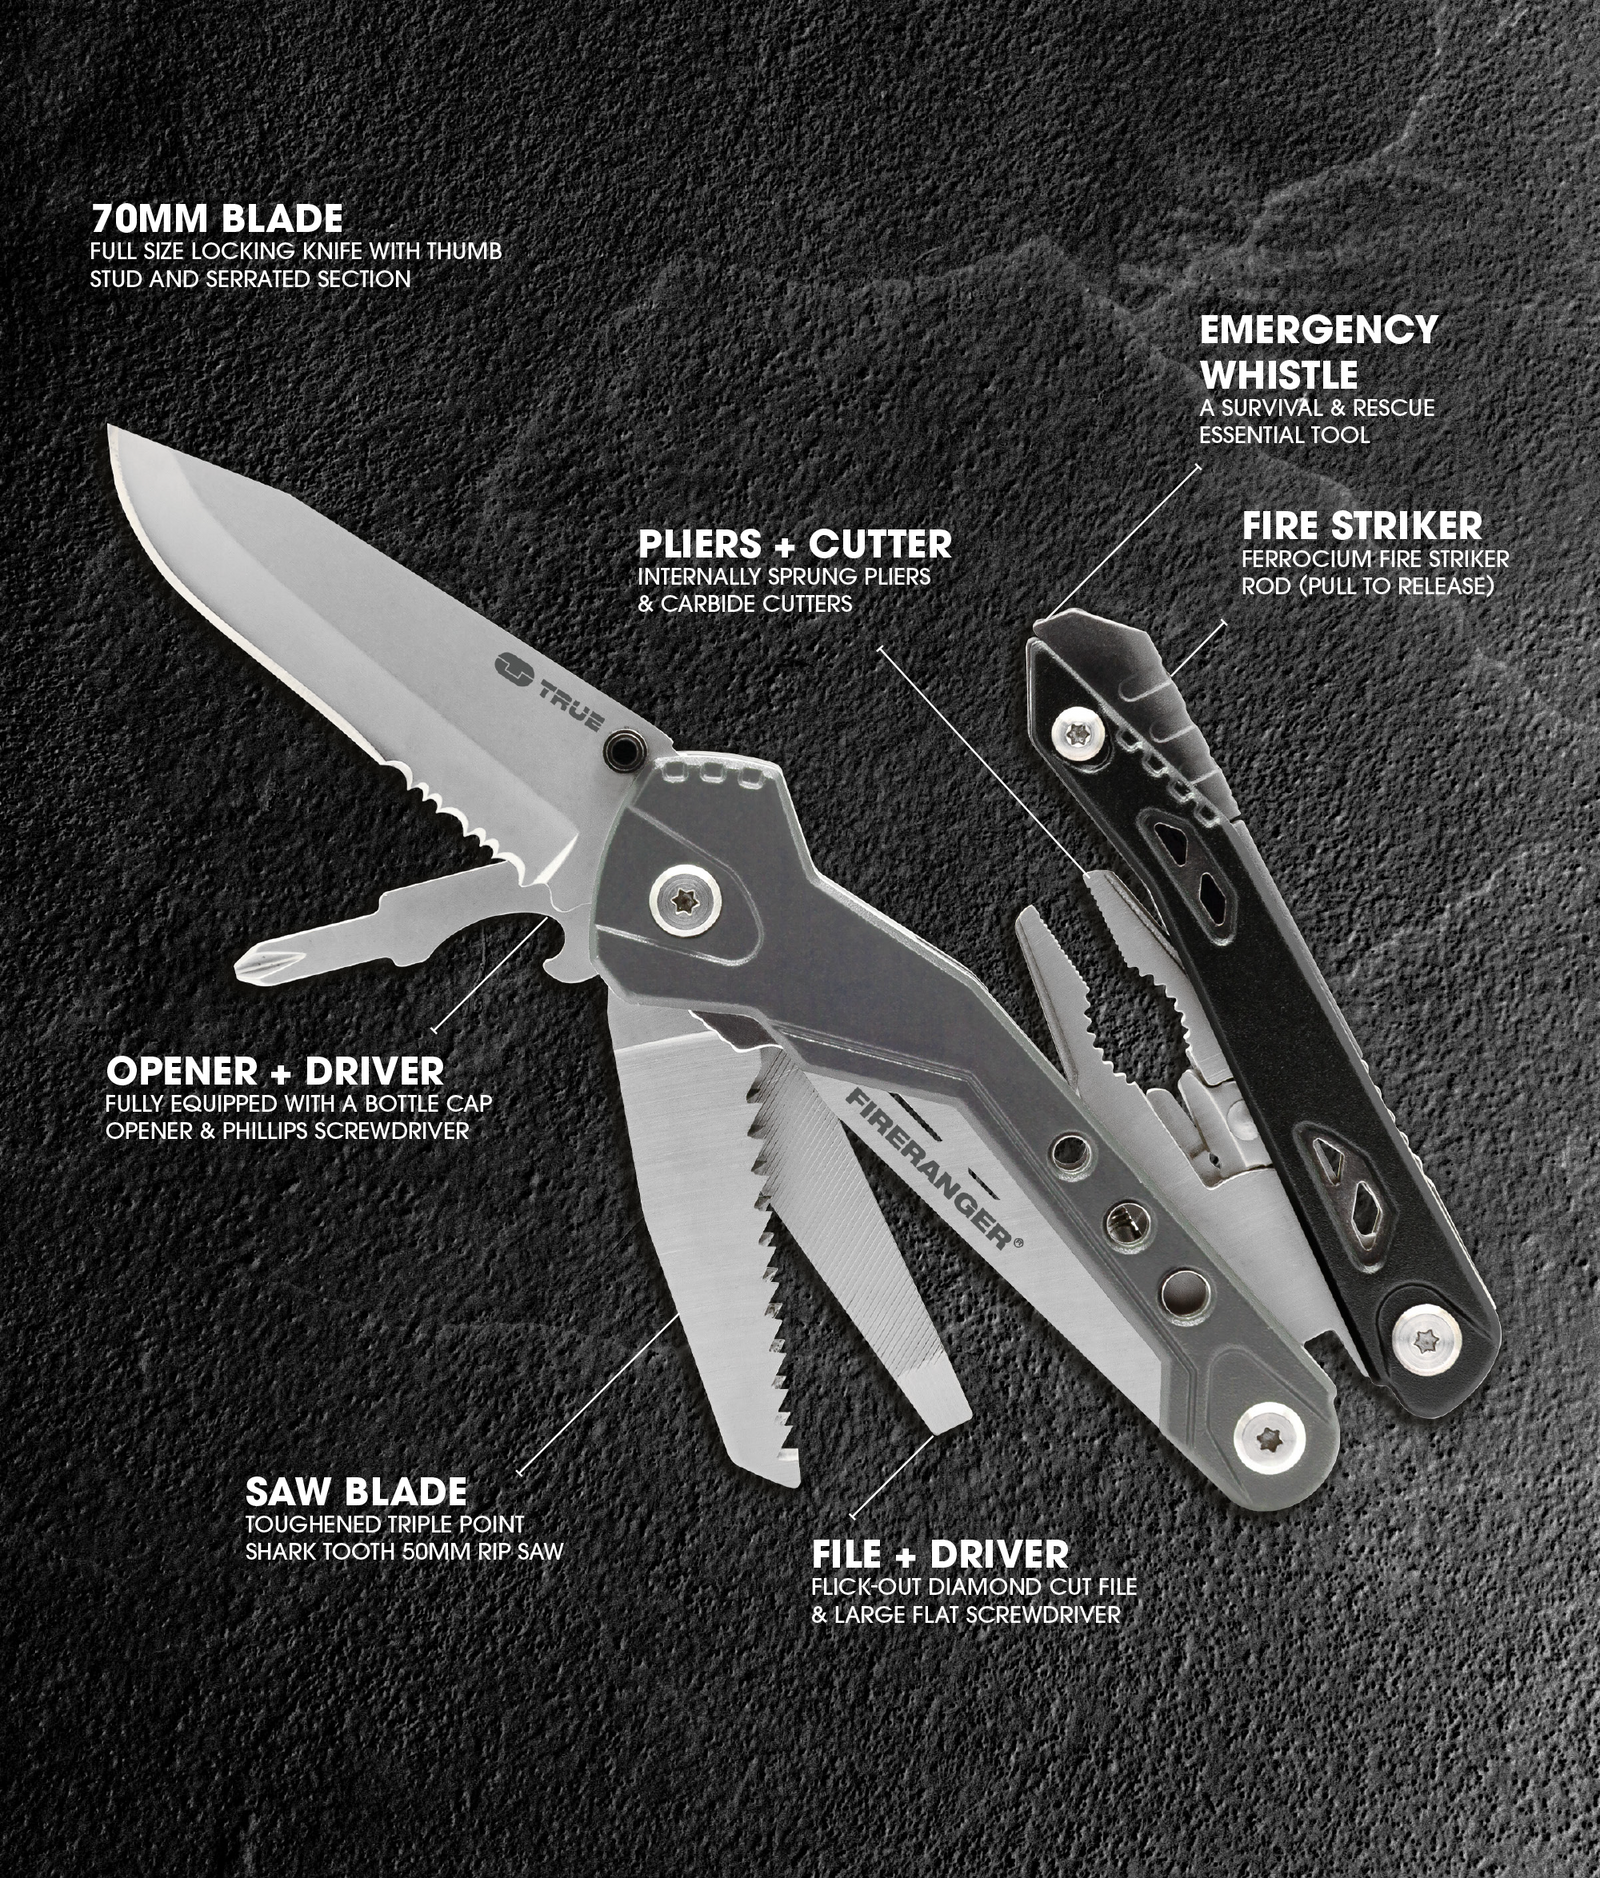 True Utility Fireranger | The all in one pocket camping multi tool, with fire striker, whistle, pliers, cutter, knife, bottle opener, screwdriver, saw blade and file